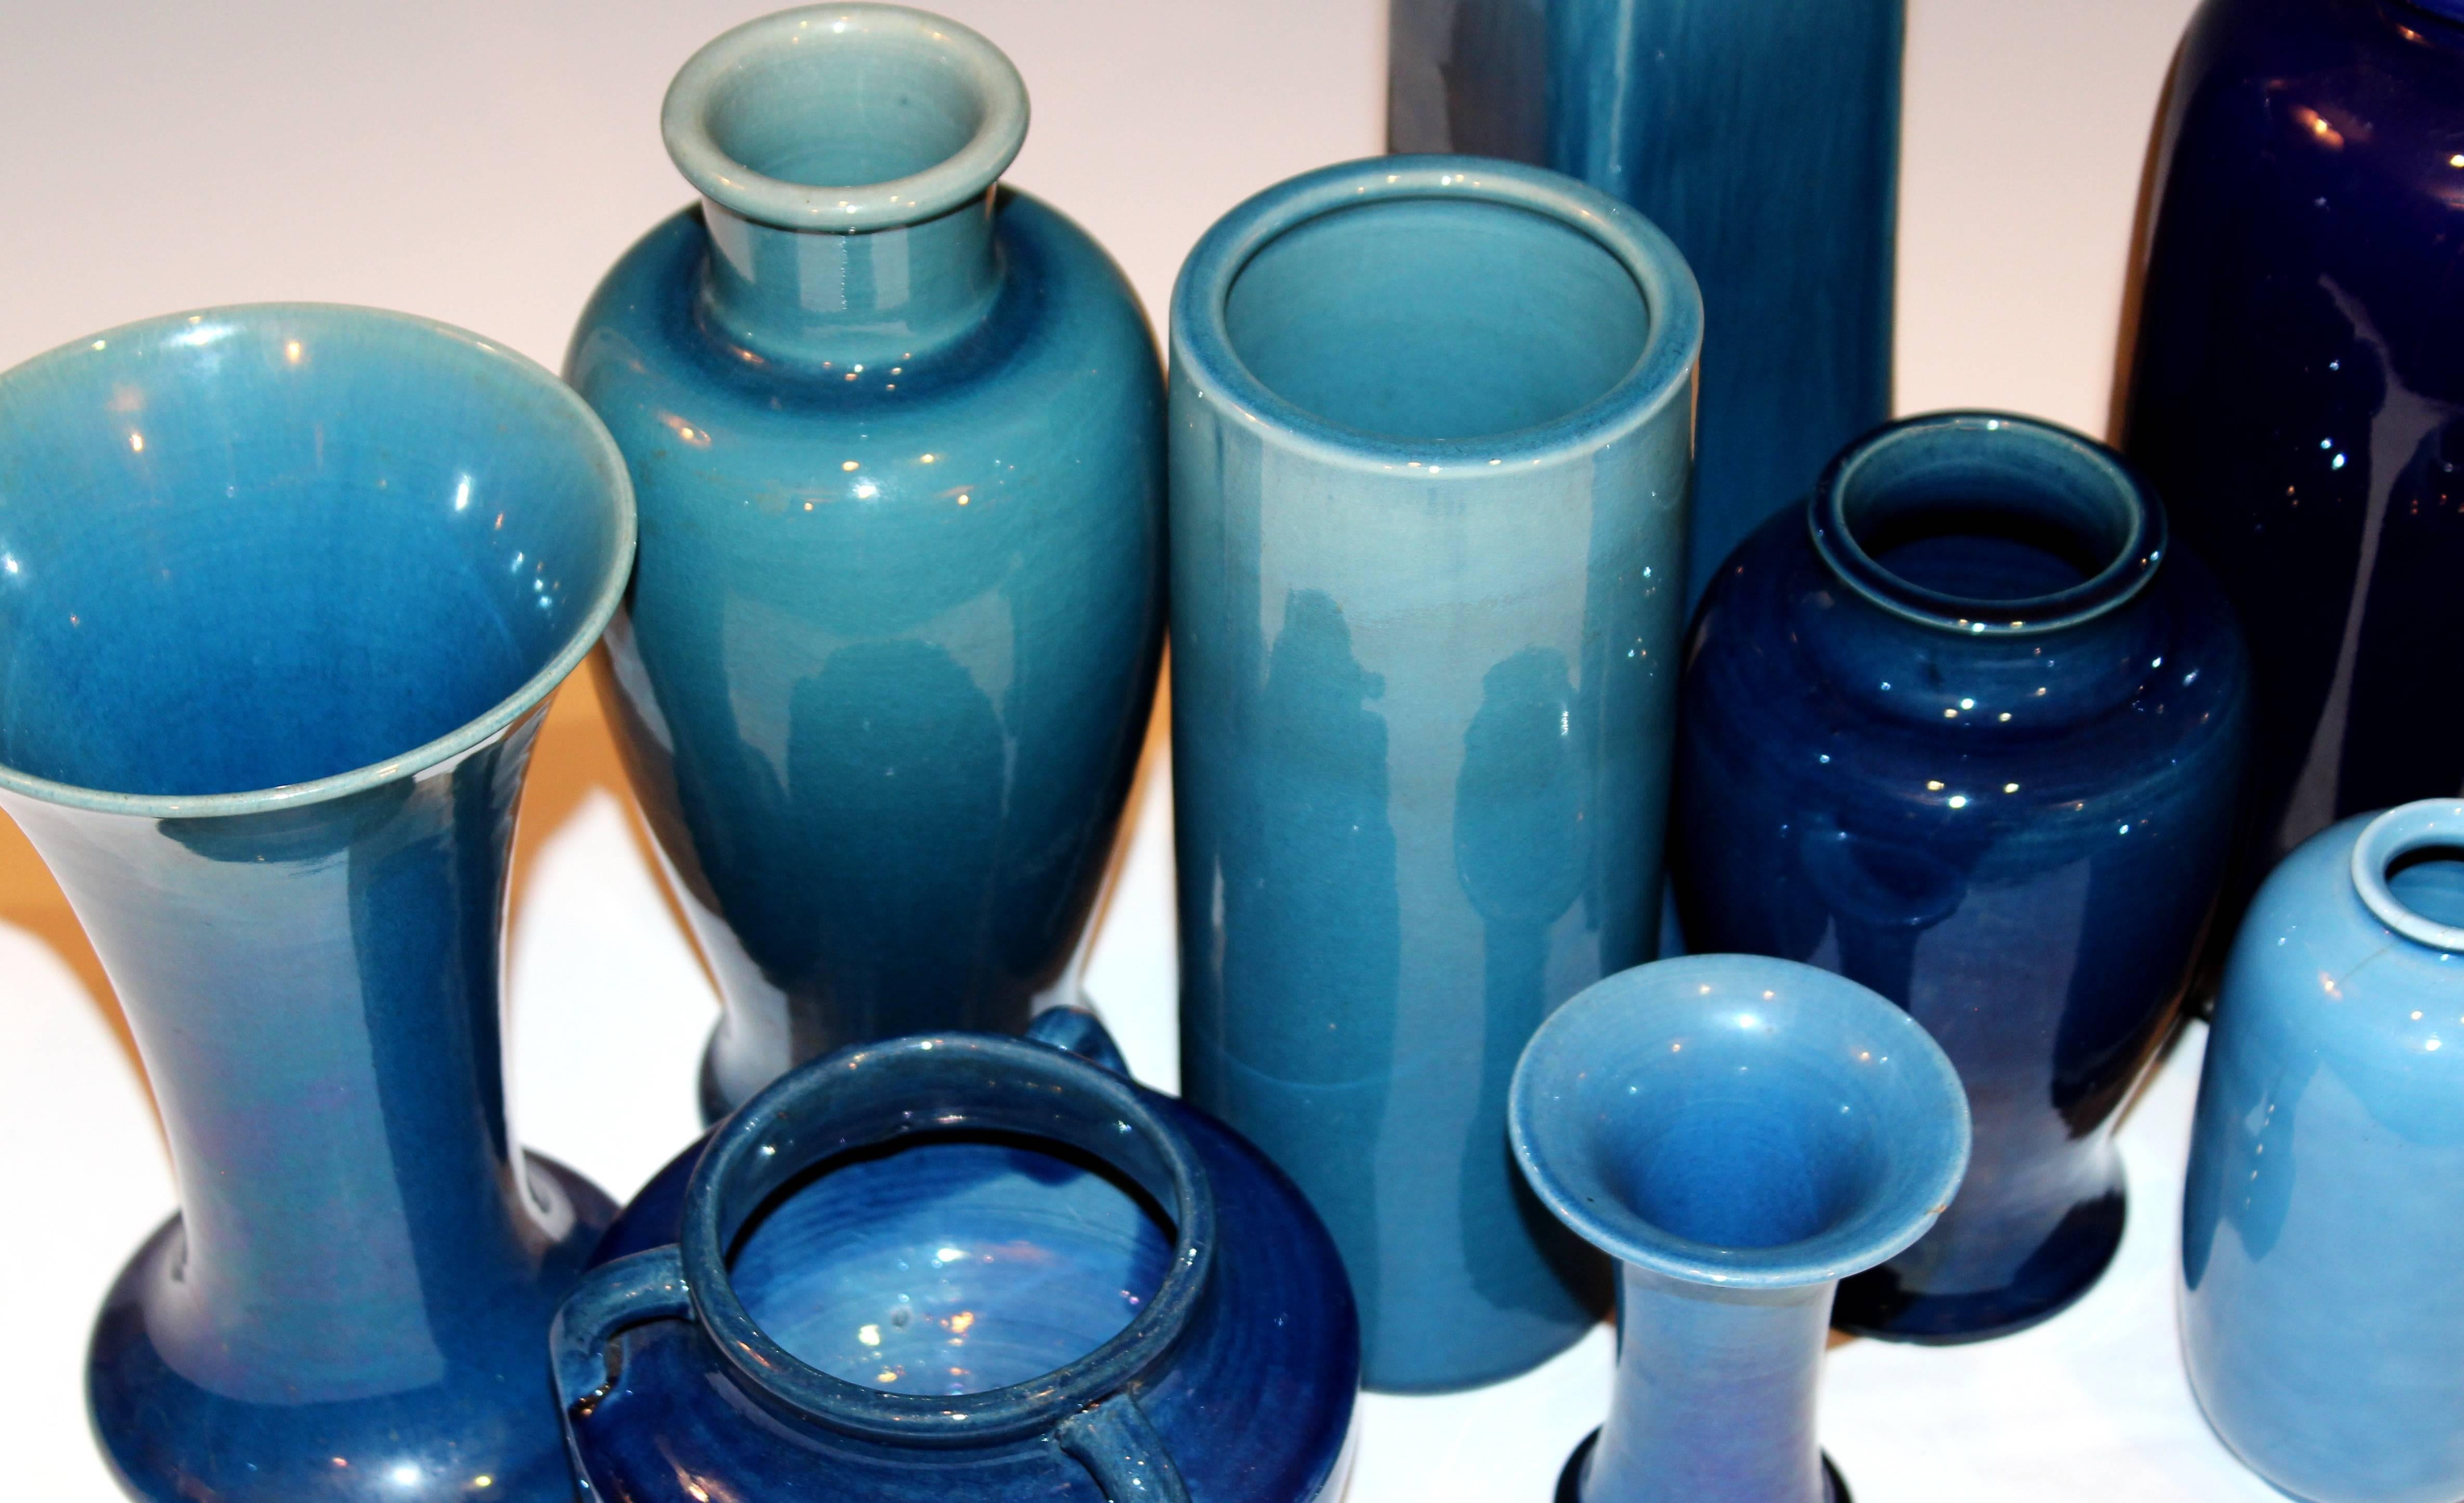 Early 20th Century Set of Antique and Vintage Awaji Studio Pottery Vases Jars Shades of Blue